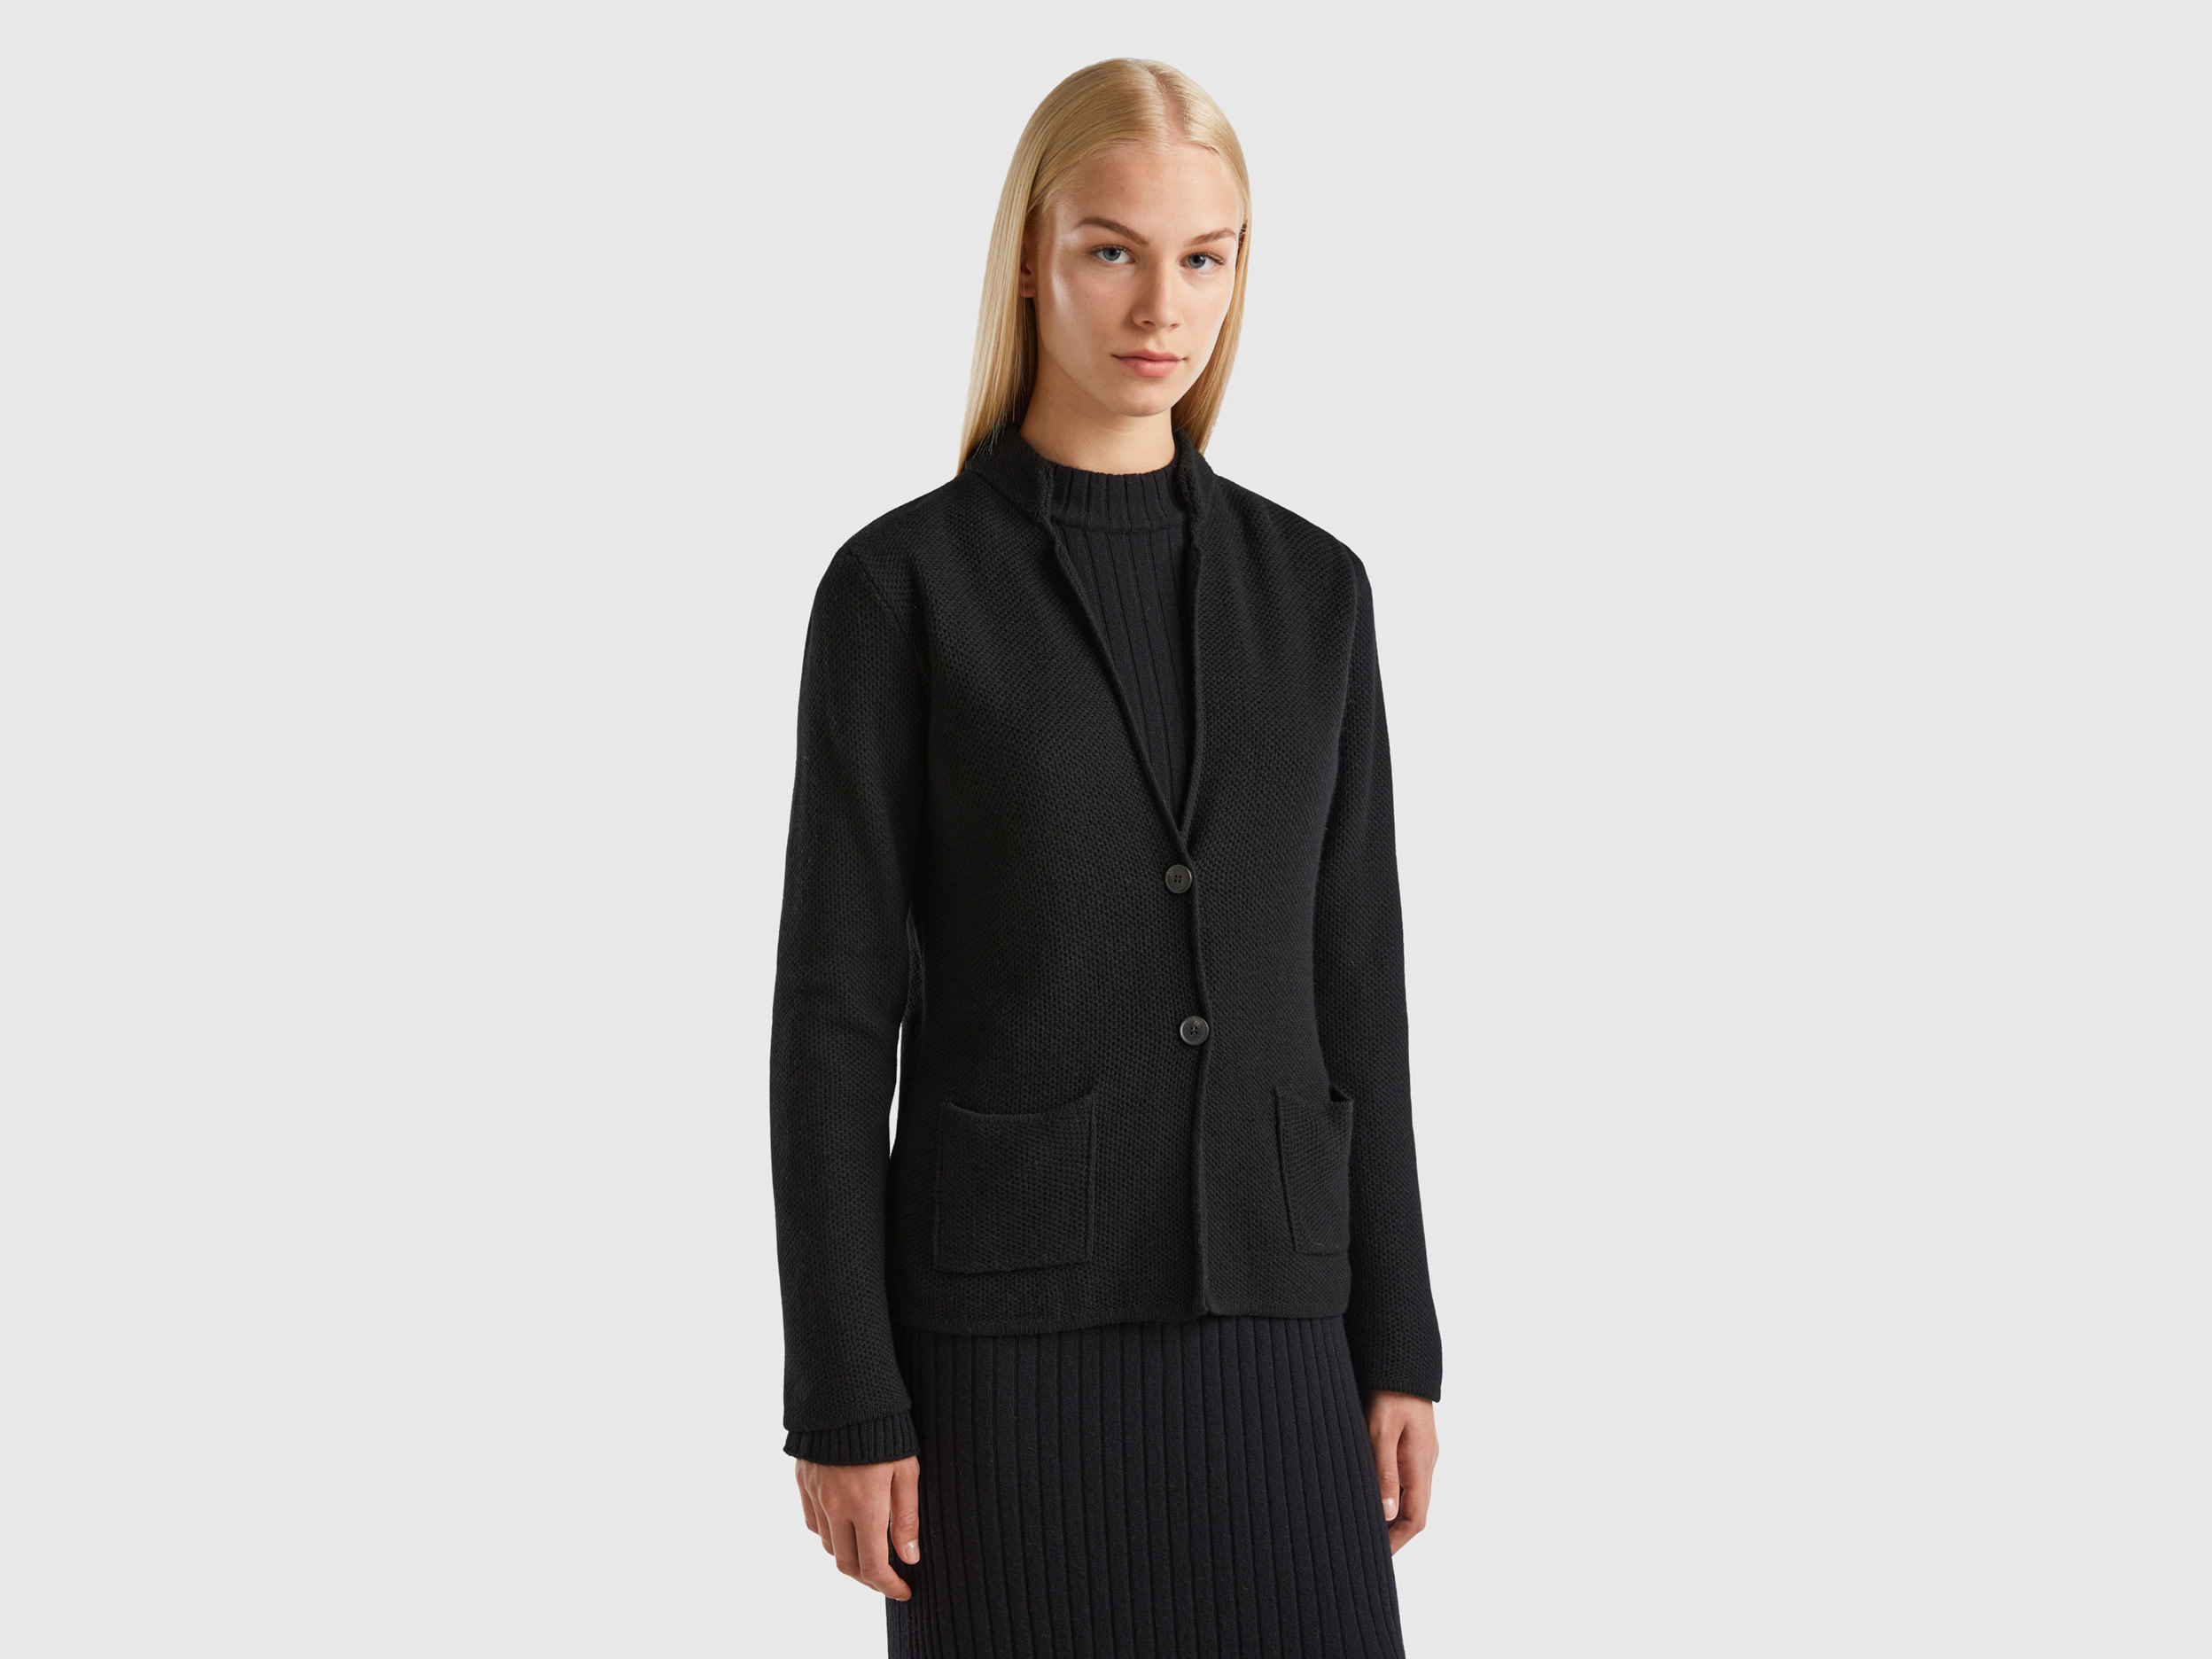 Benetton, Knit Jacket In Wool And Cashmere Blend, size XS, Black, Women